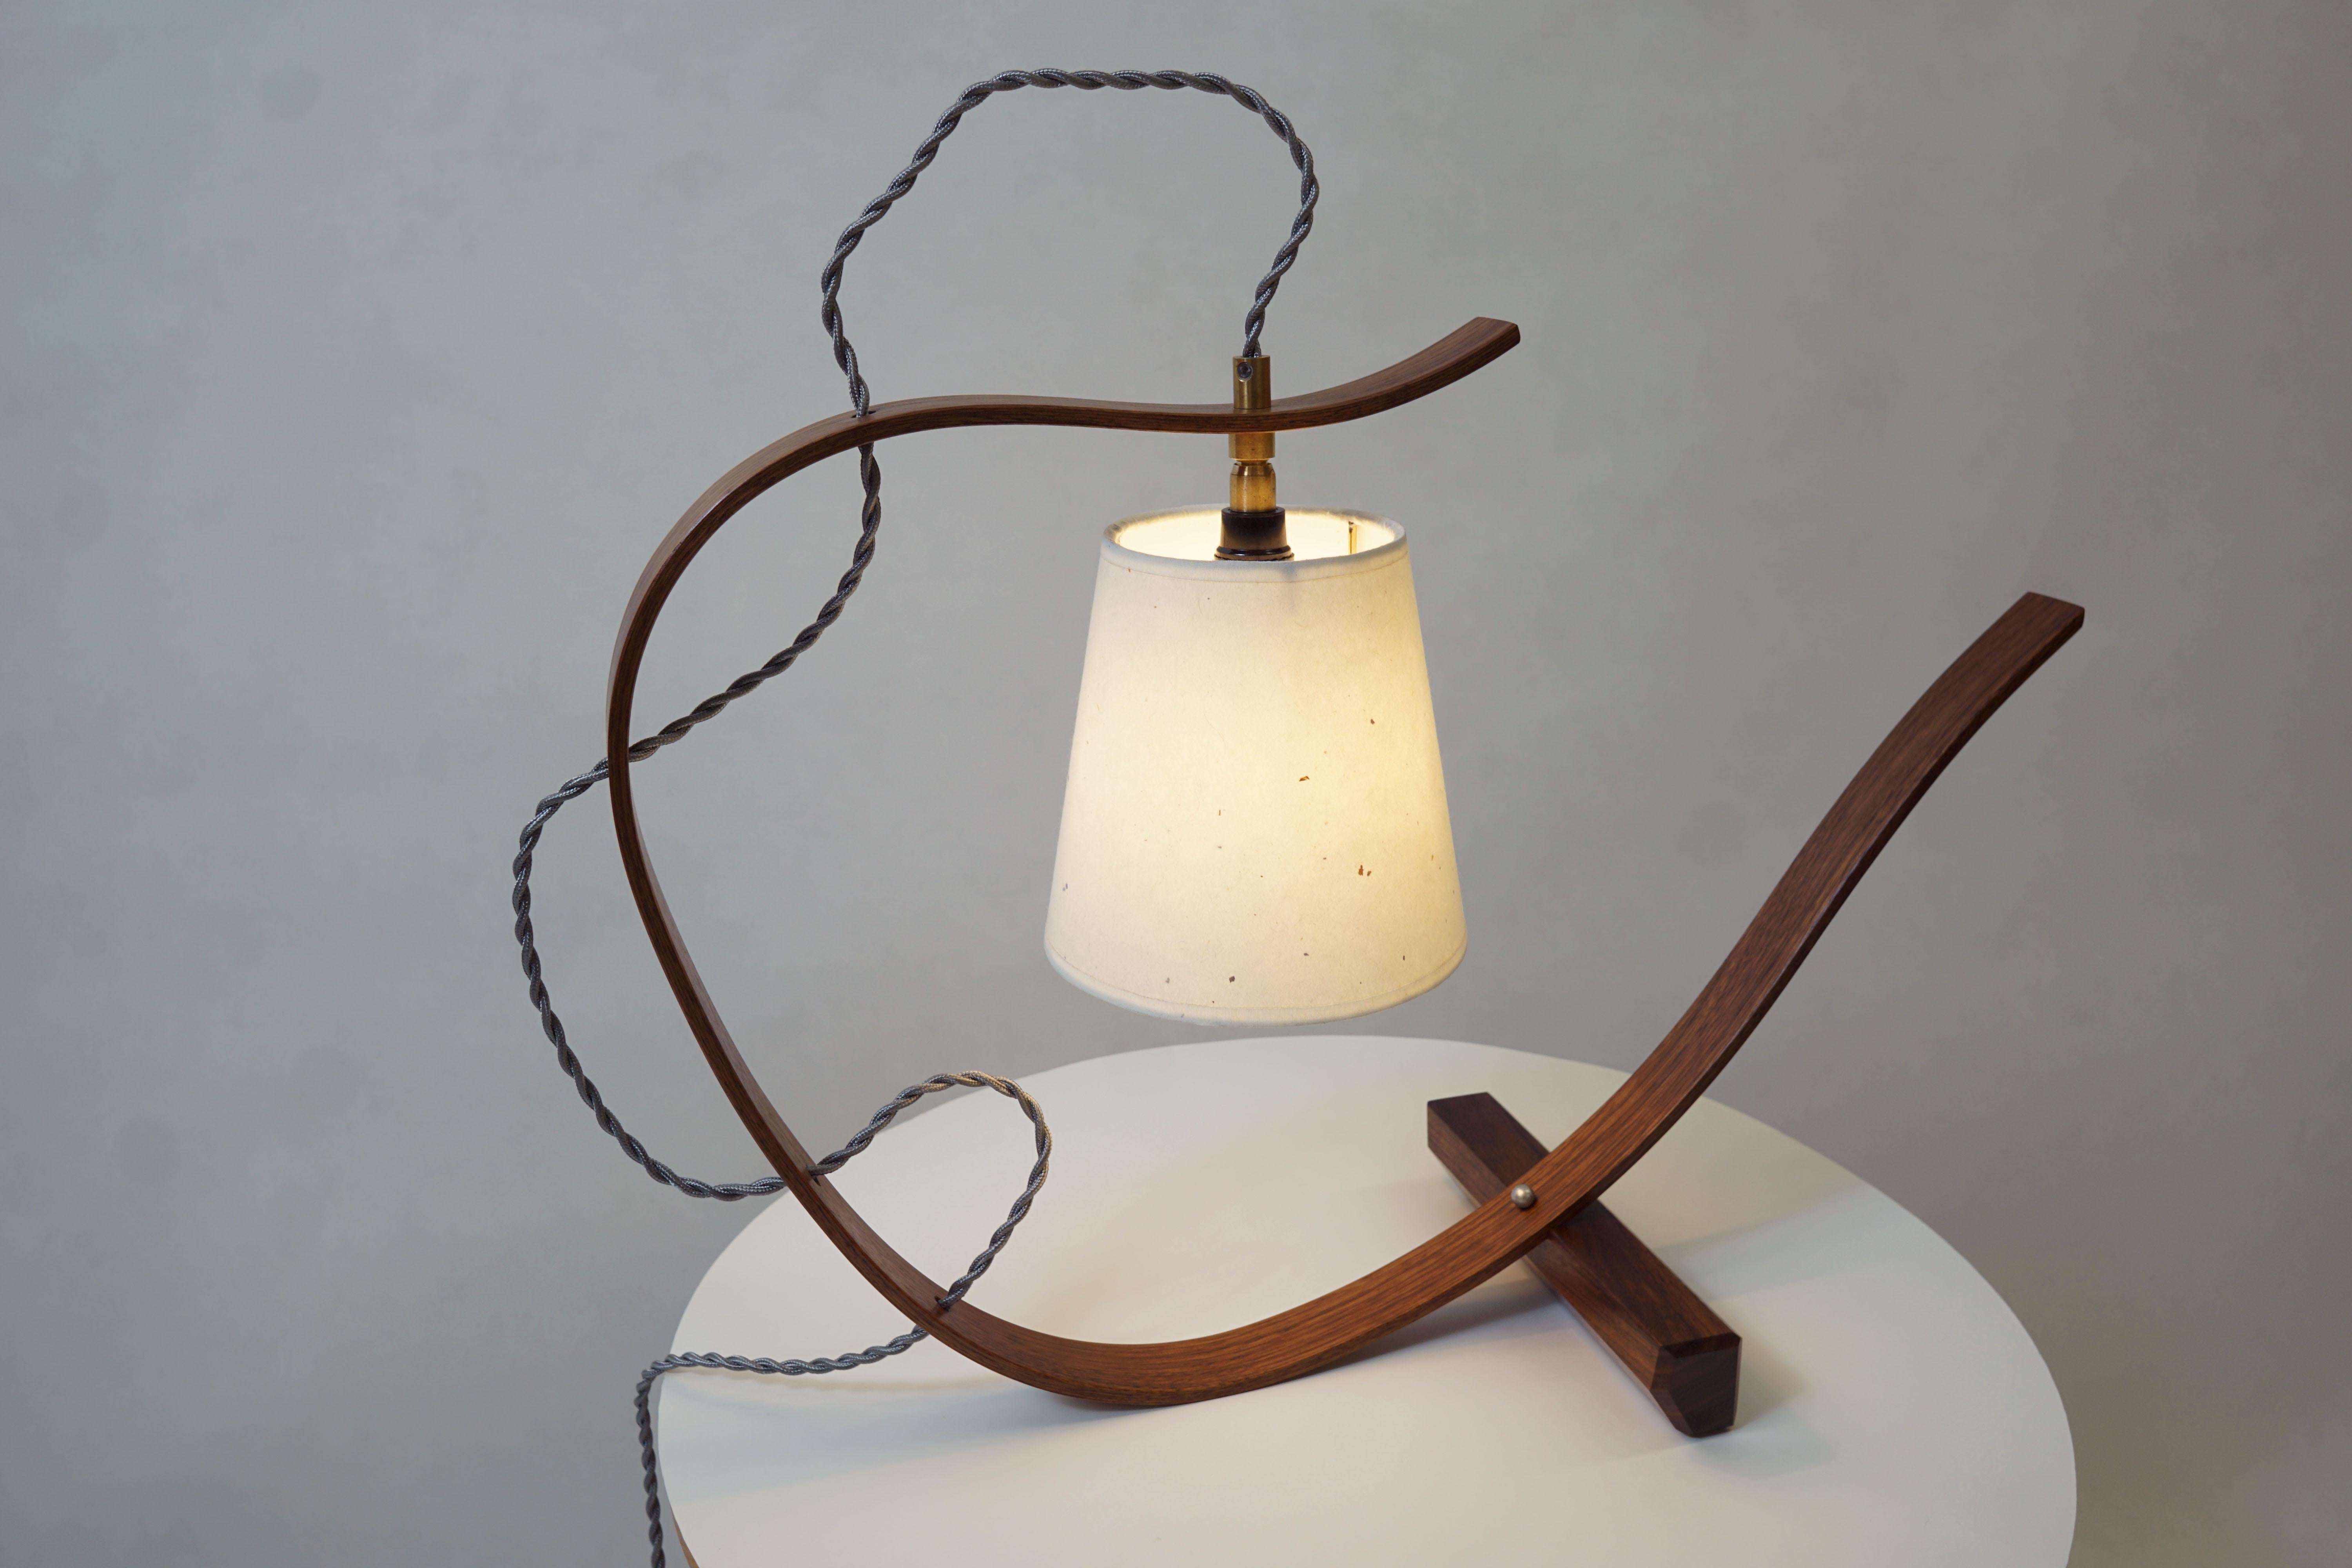 American Curved Table Lamp Sculpture, Handcrafted in Walnut Wood with Walnut Base For Sale